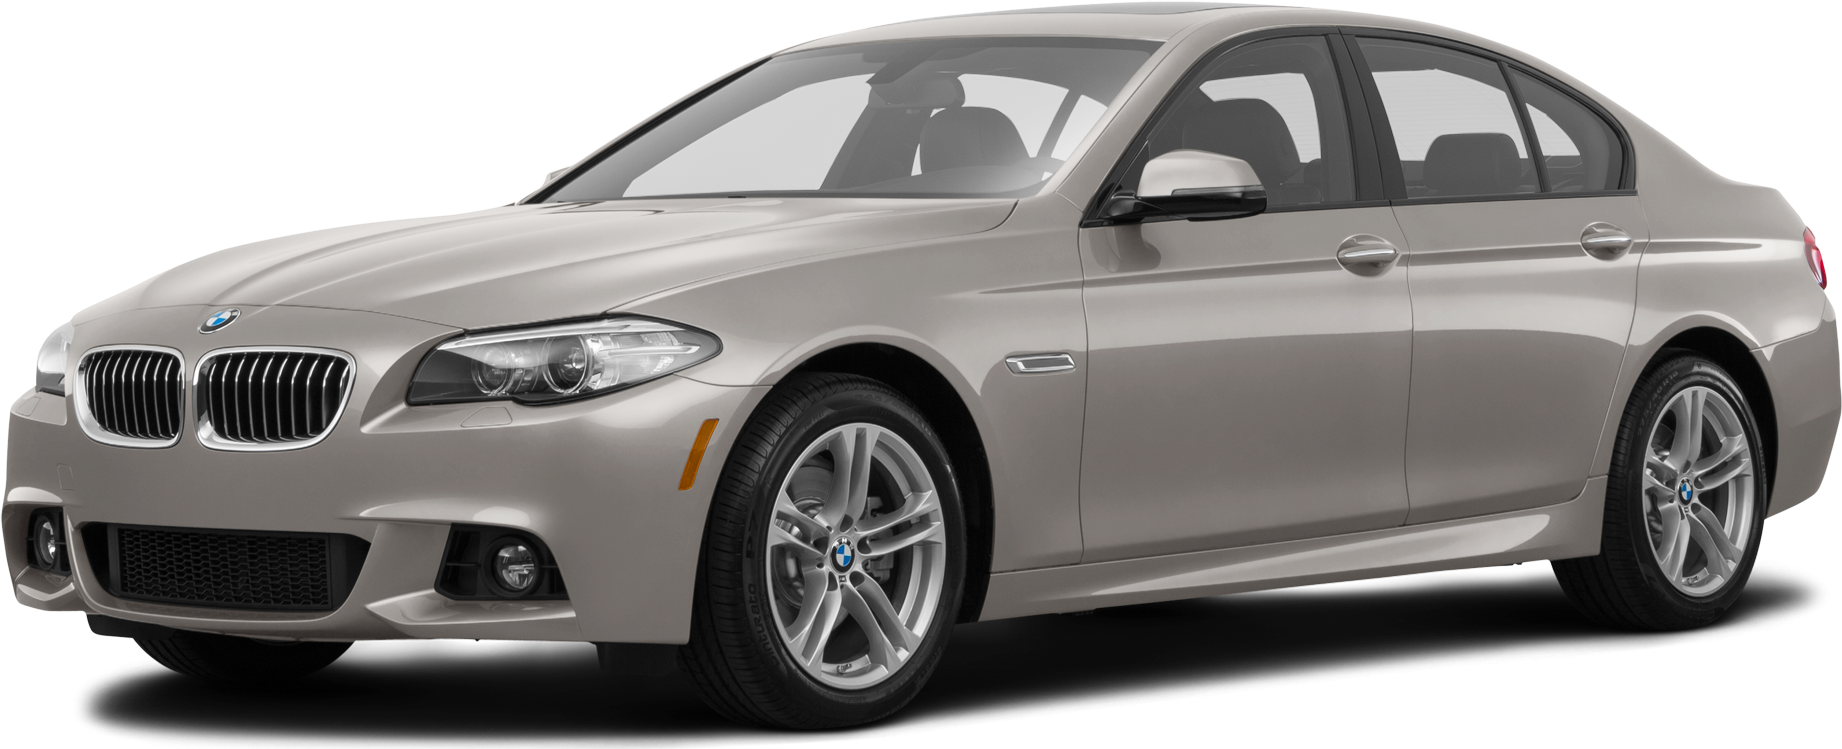 2016 BMW 5 Series Values & Cars for Sale | Kelley Blue Book